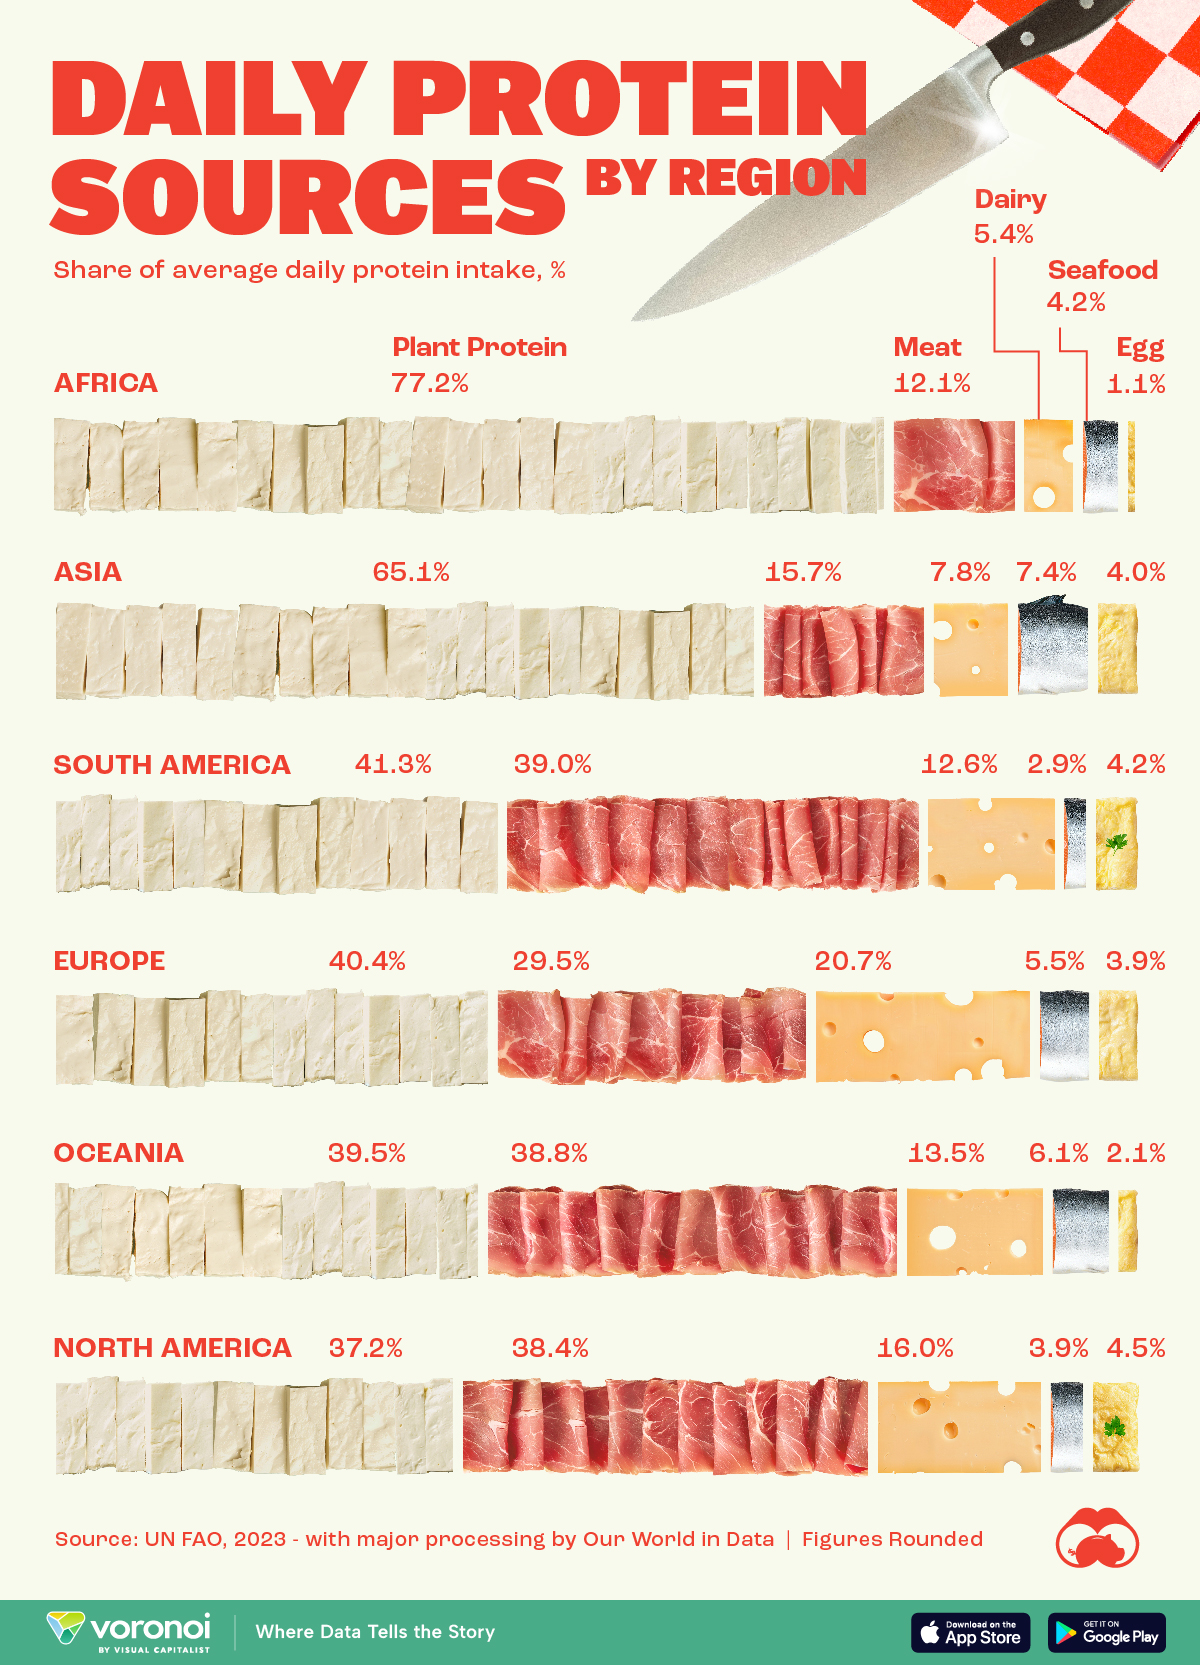 Bar chart showing daily protein sources by region.